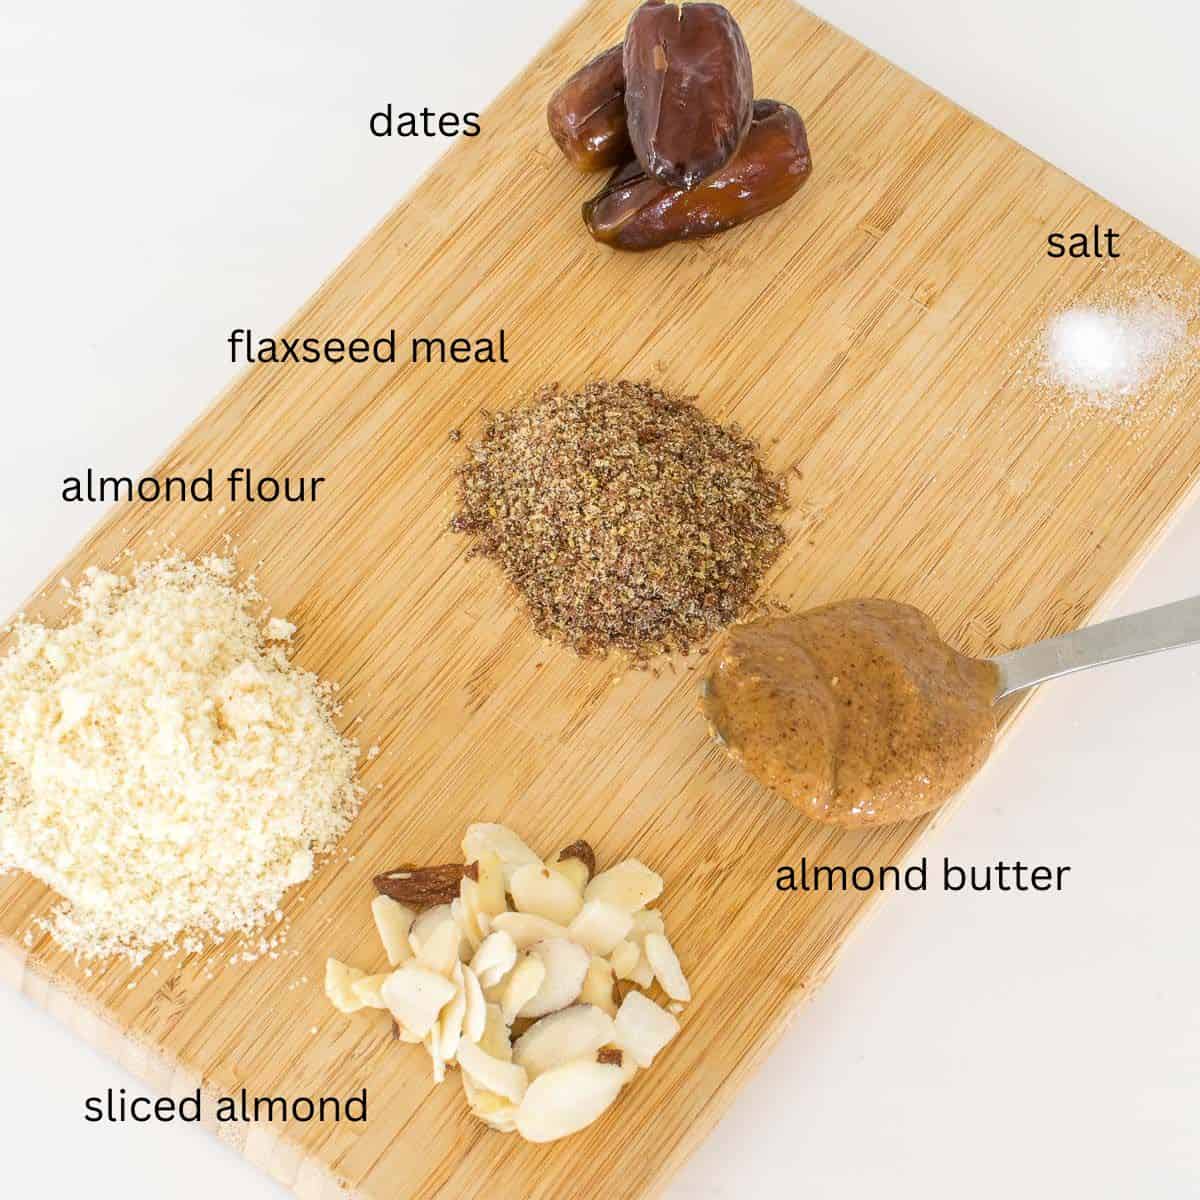 top view of ingredients on a wooden board.